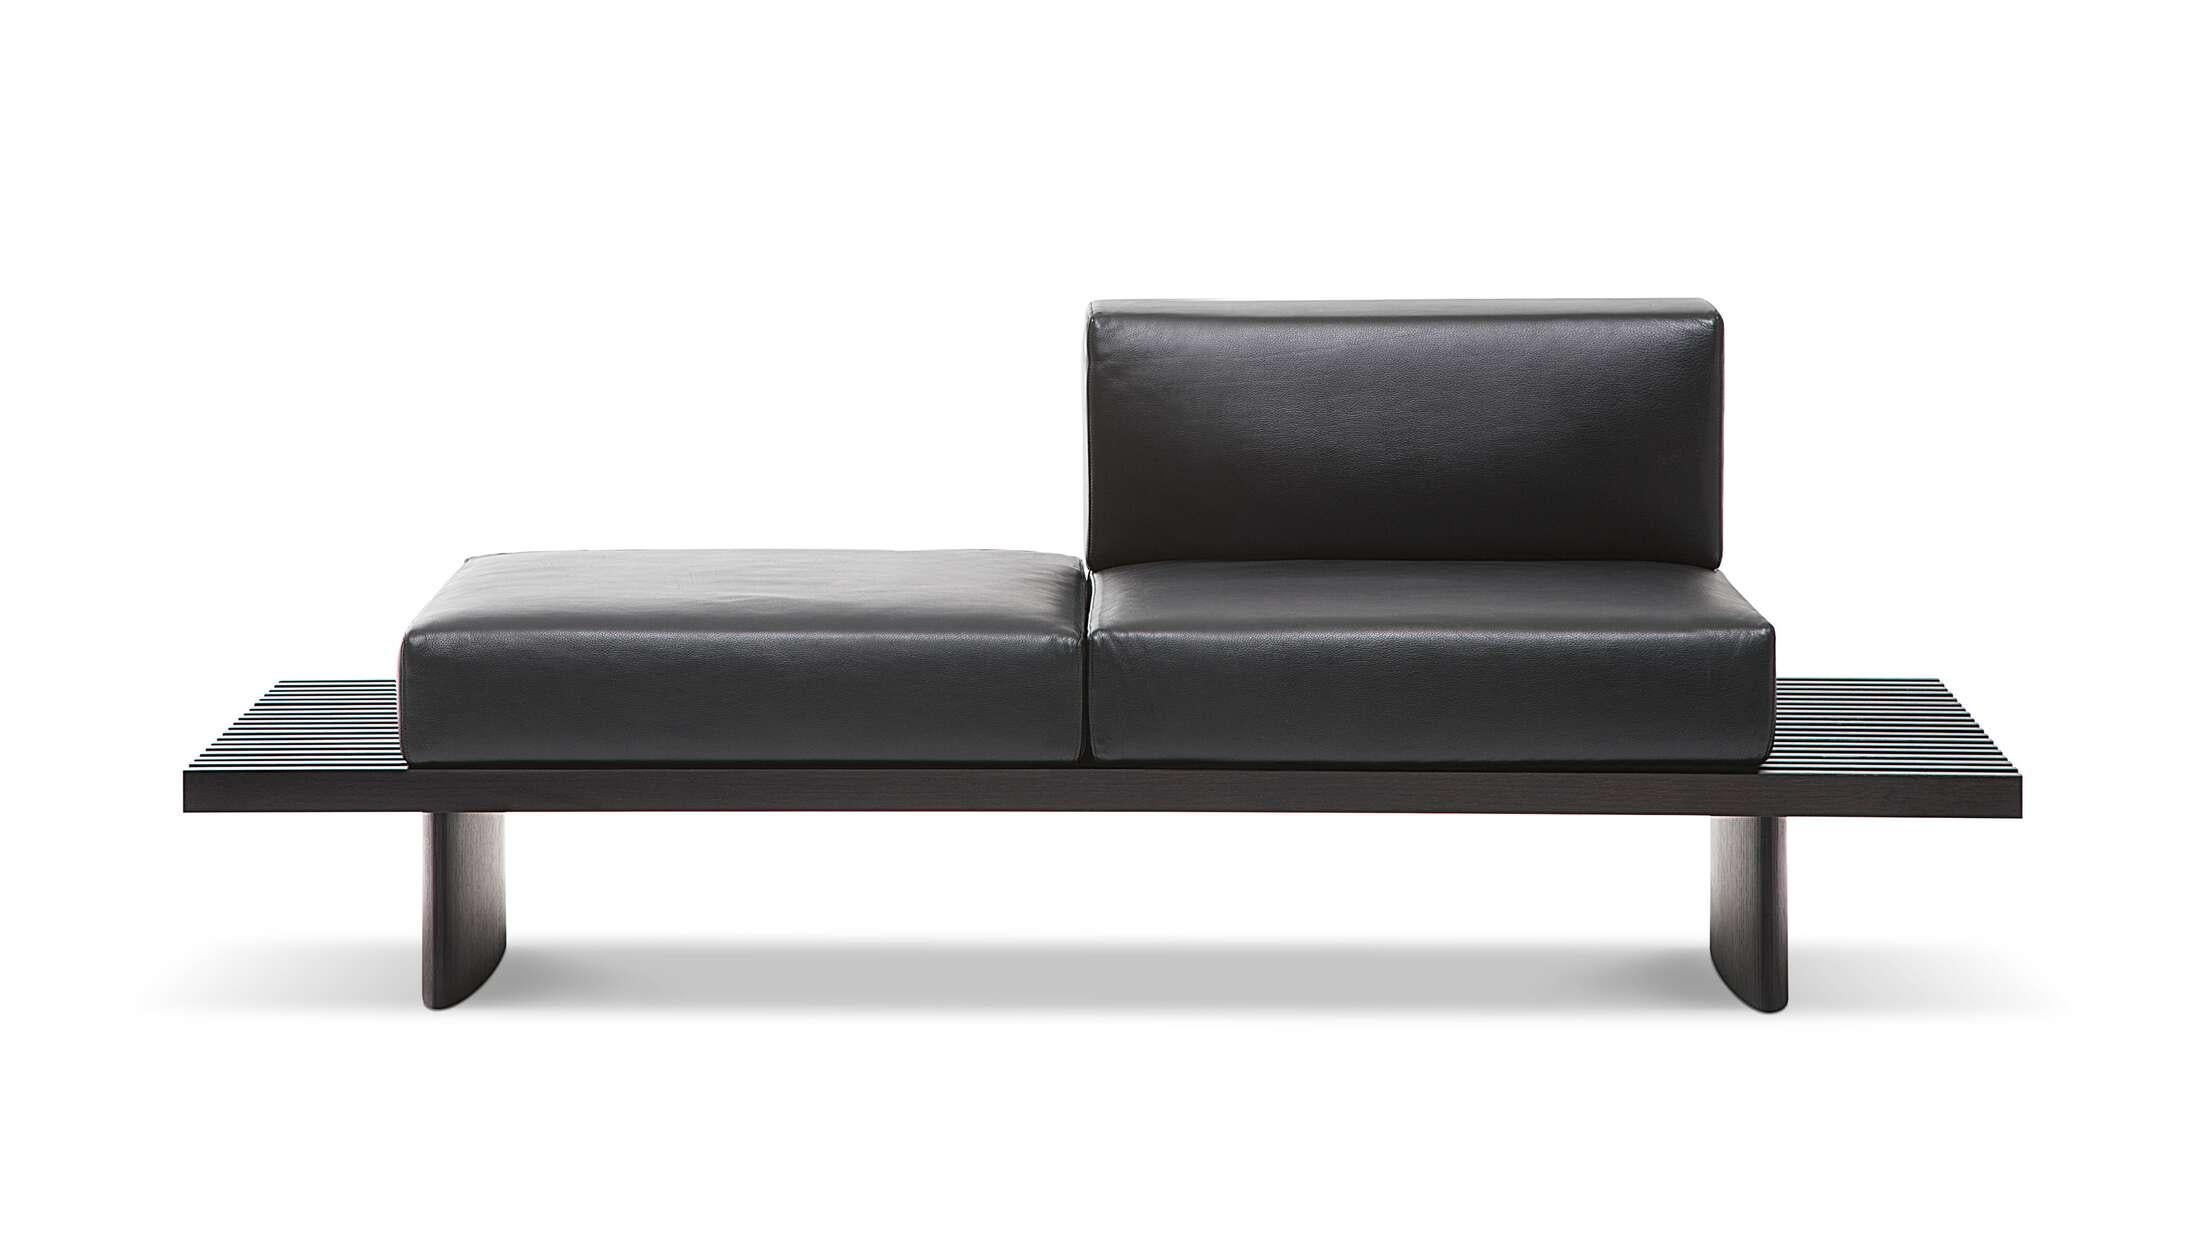 Italian Charlotte Perriand Refolo Low Table, Bench or Sofa for Cassina, Italy - new For Sale